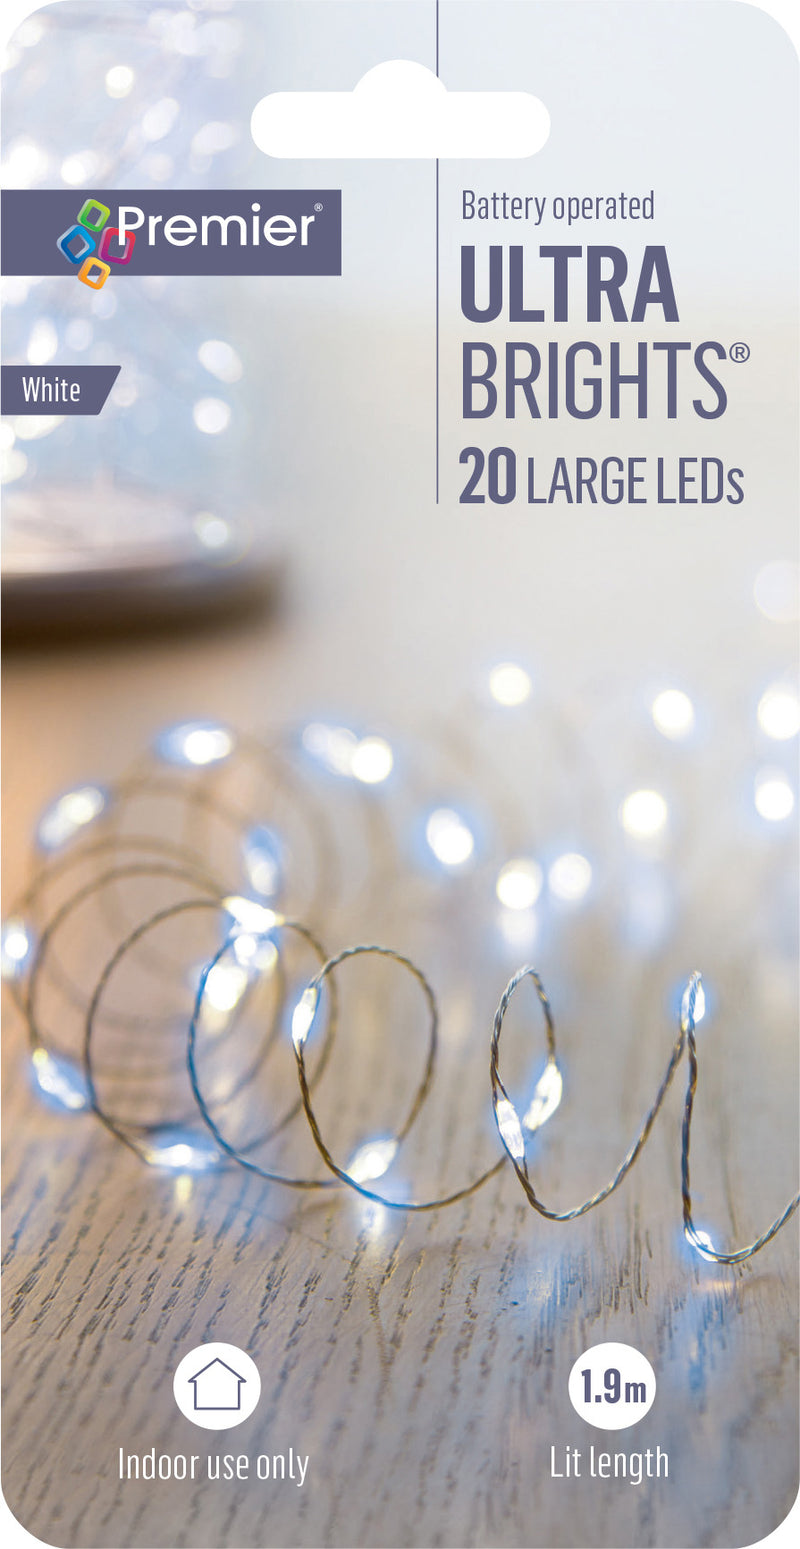 Microbright LED Wire Lights - Various Sizes & Colours